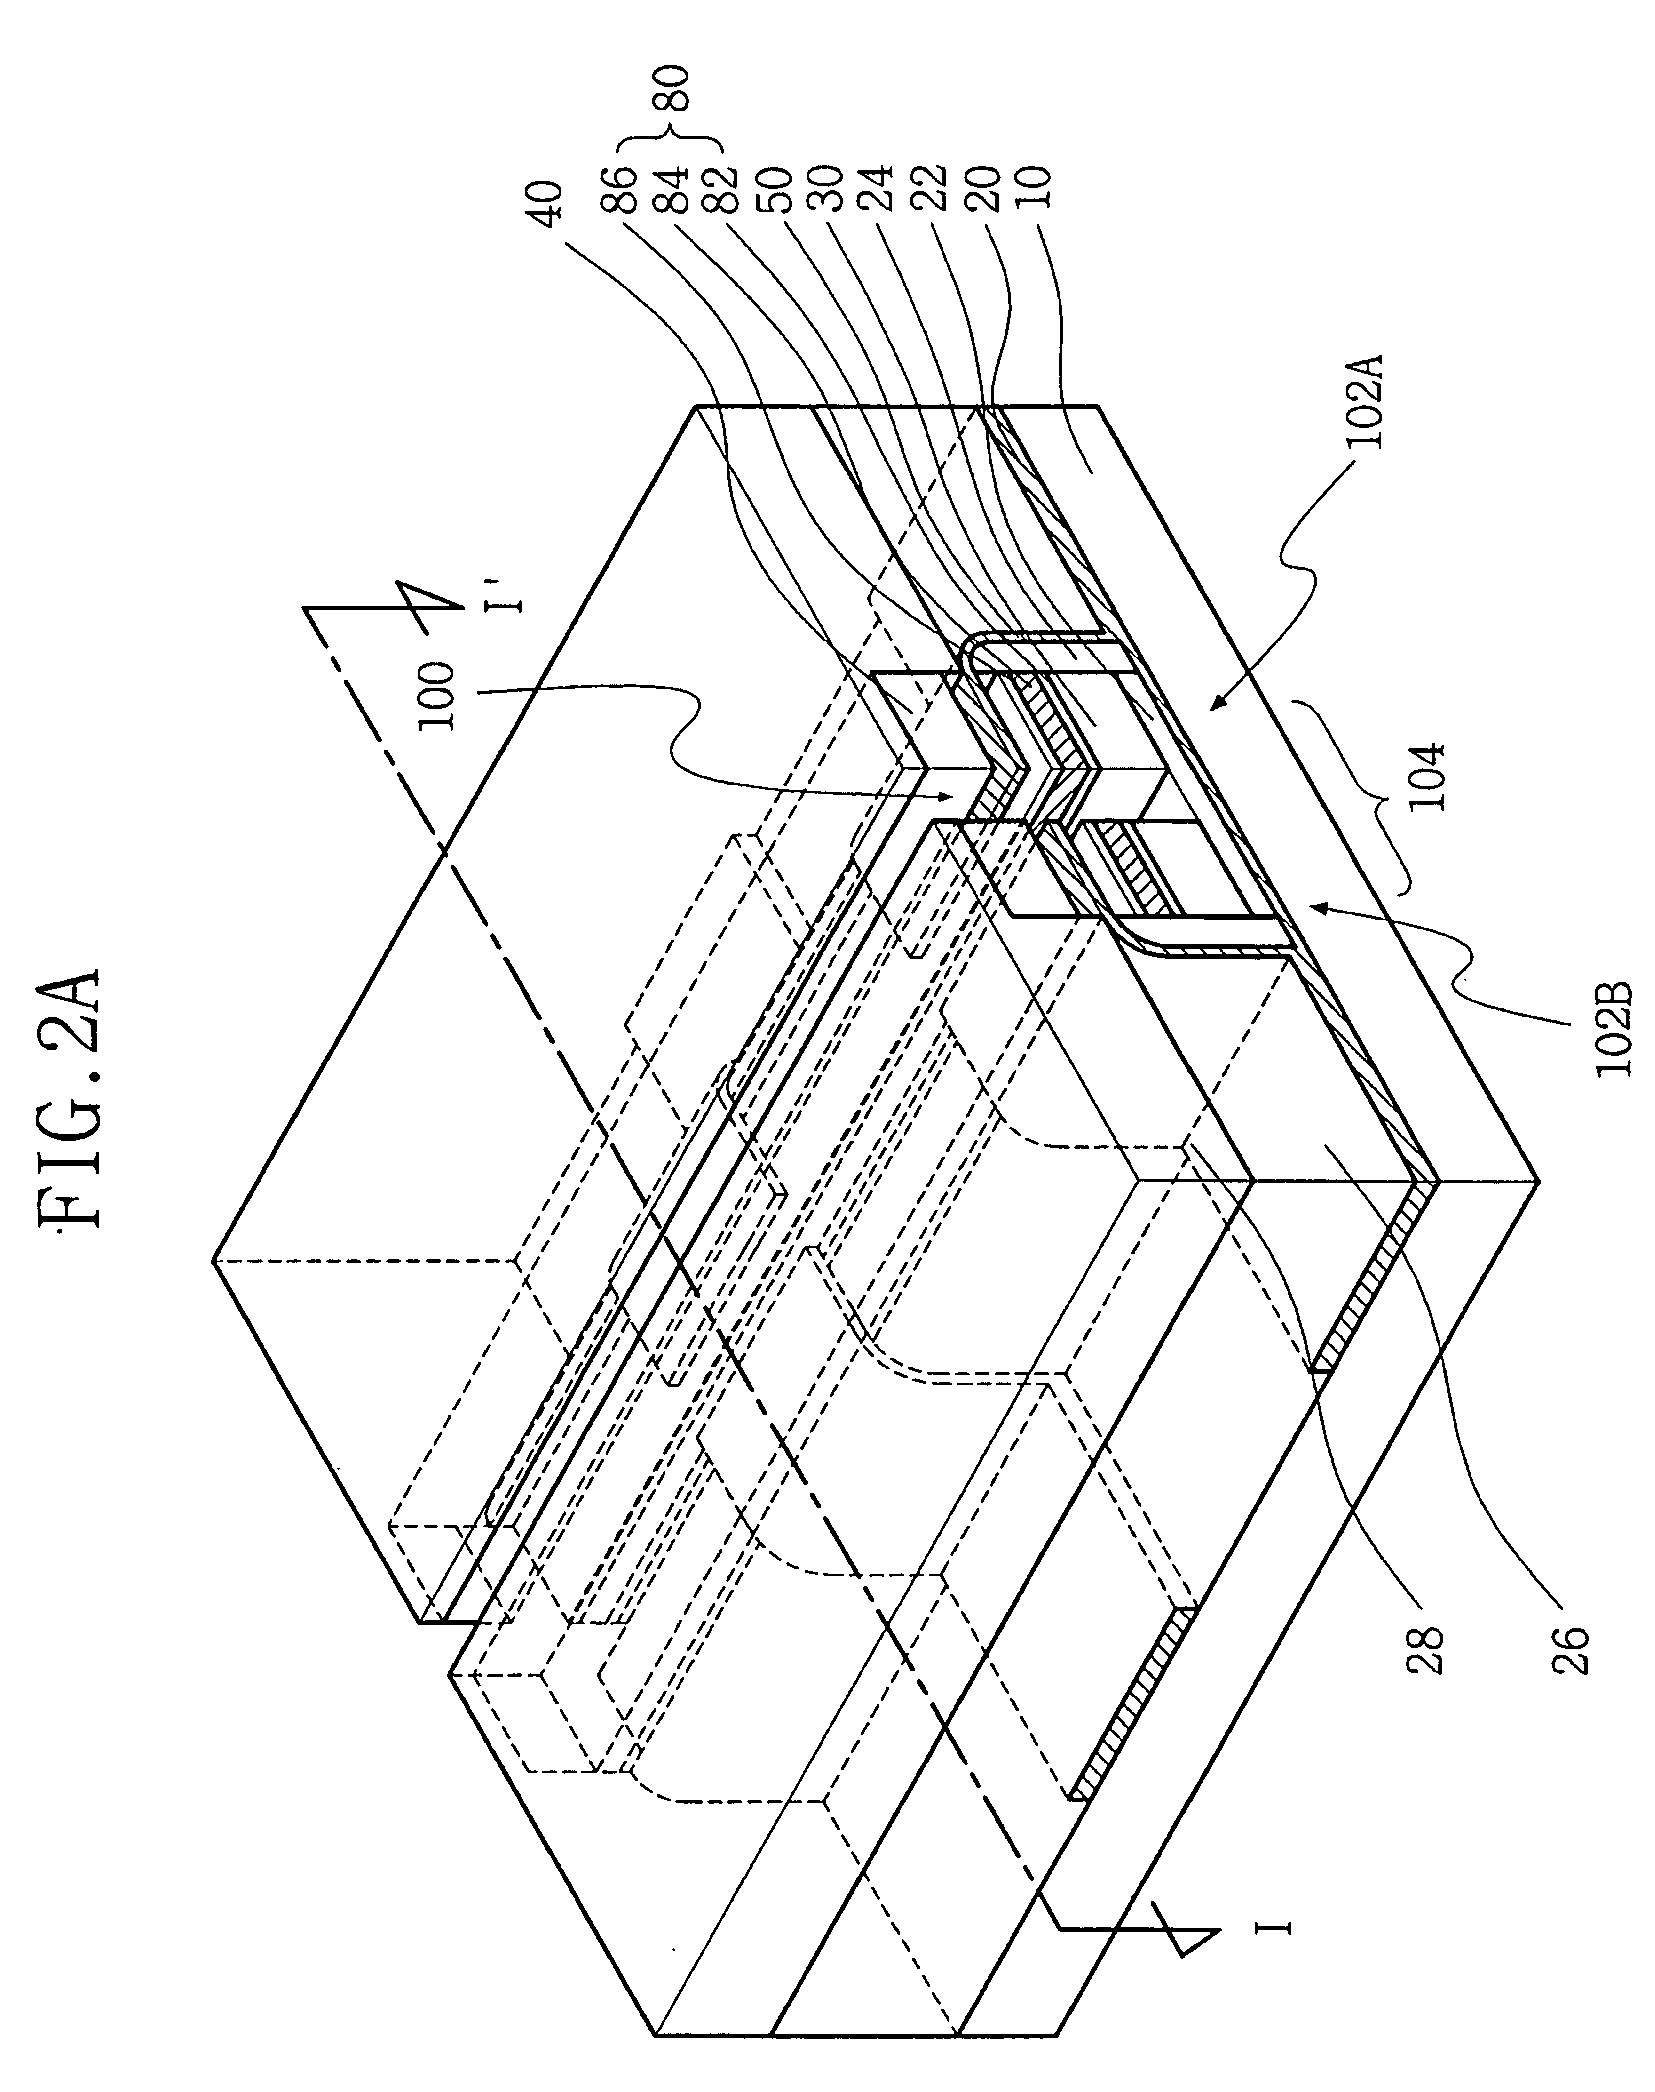 Multi-bit electromechanical memory devices and methods of manufacturing the same